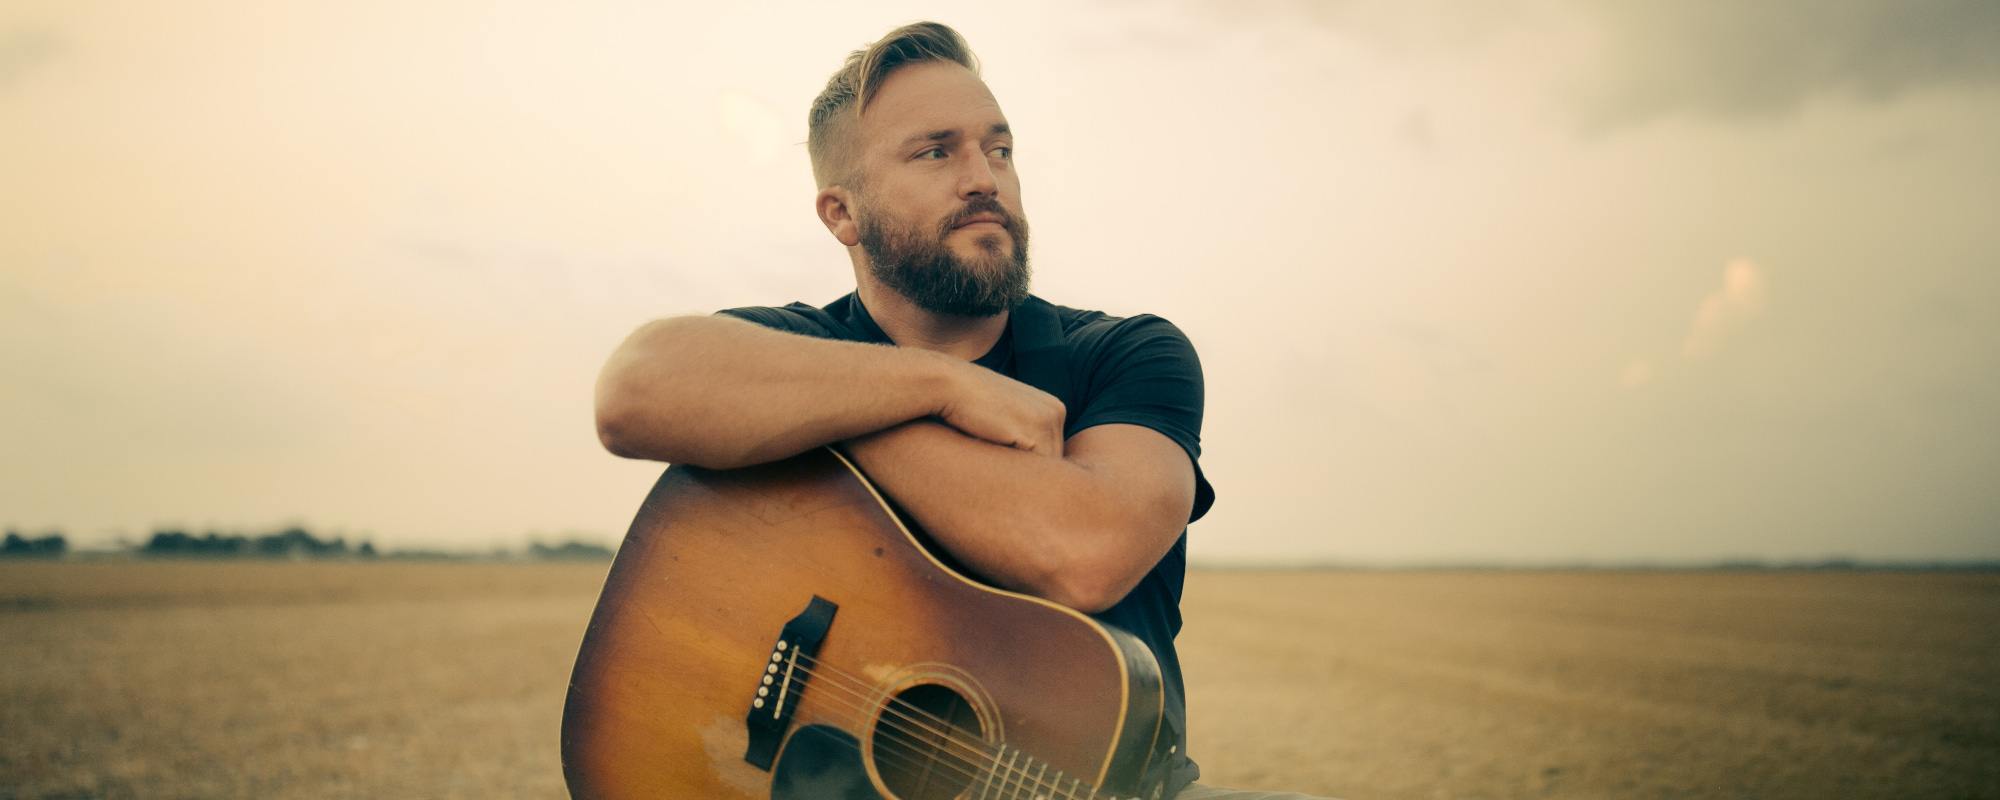 Logan Mize Gets Back to His Midwestern Roots on ‘Welcome To Prairieville’